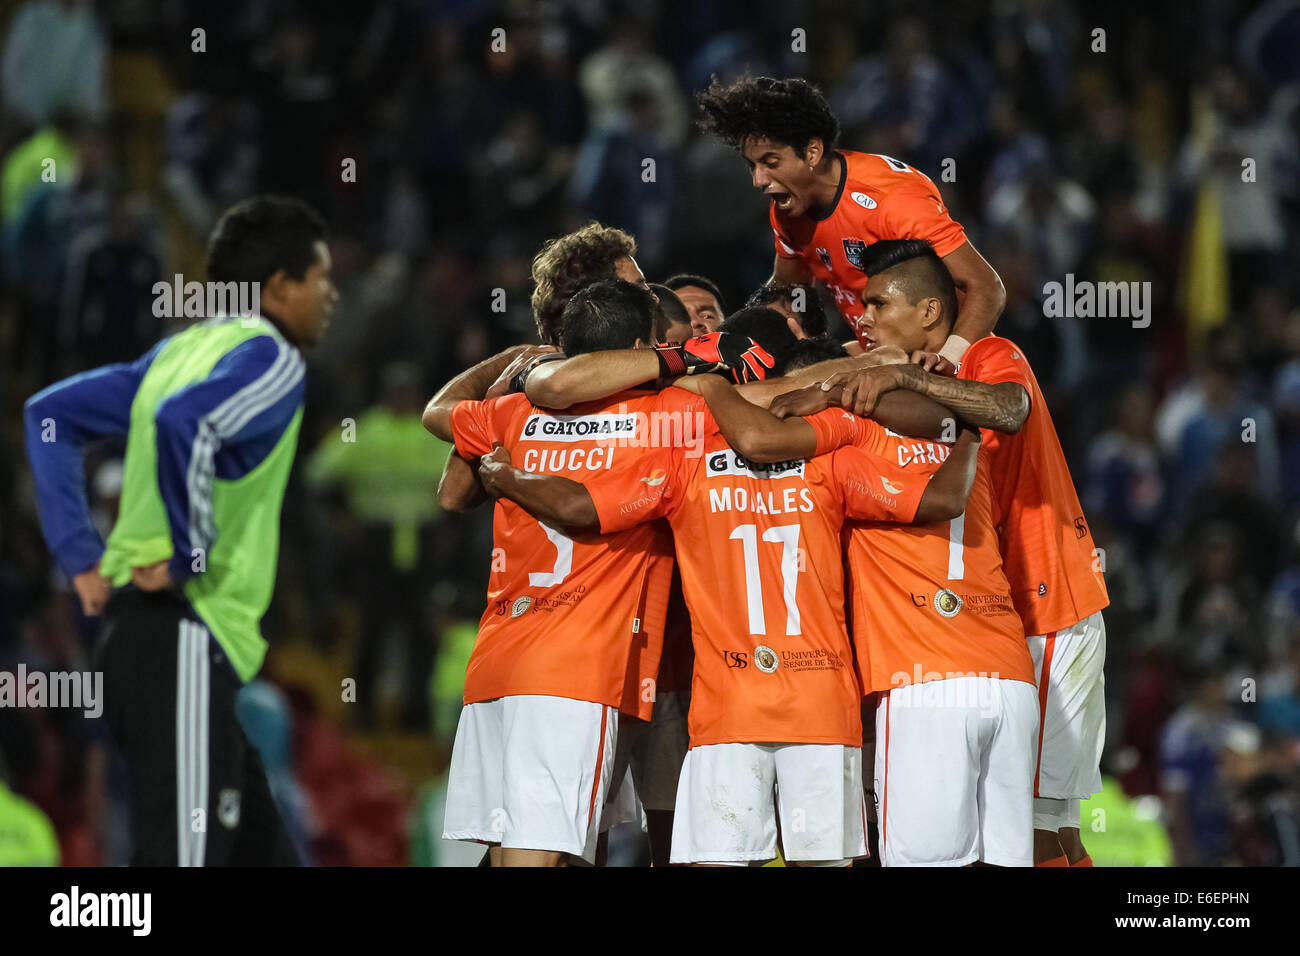 Bogota, Colombia. 21st Aug, 2014. Players of Cesar Vallejo of Peru celebrate after scoring during the match of the South American Cup, against Millonarios of Colombia, in Bogota, capital of Colombia, on Aug. 21, 2014. Credit:  Jhon Paz/Xinhua/Alamy Live News Stock Photo